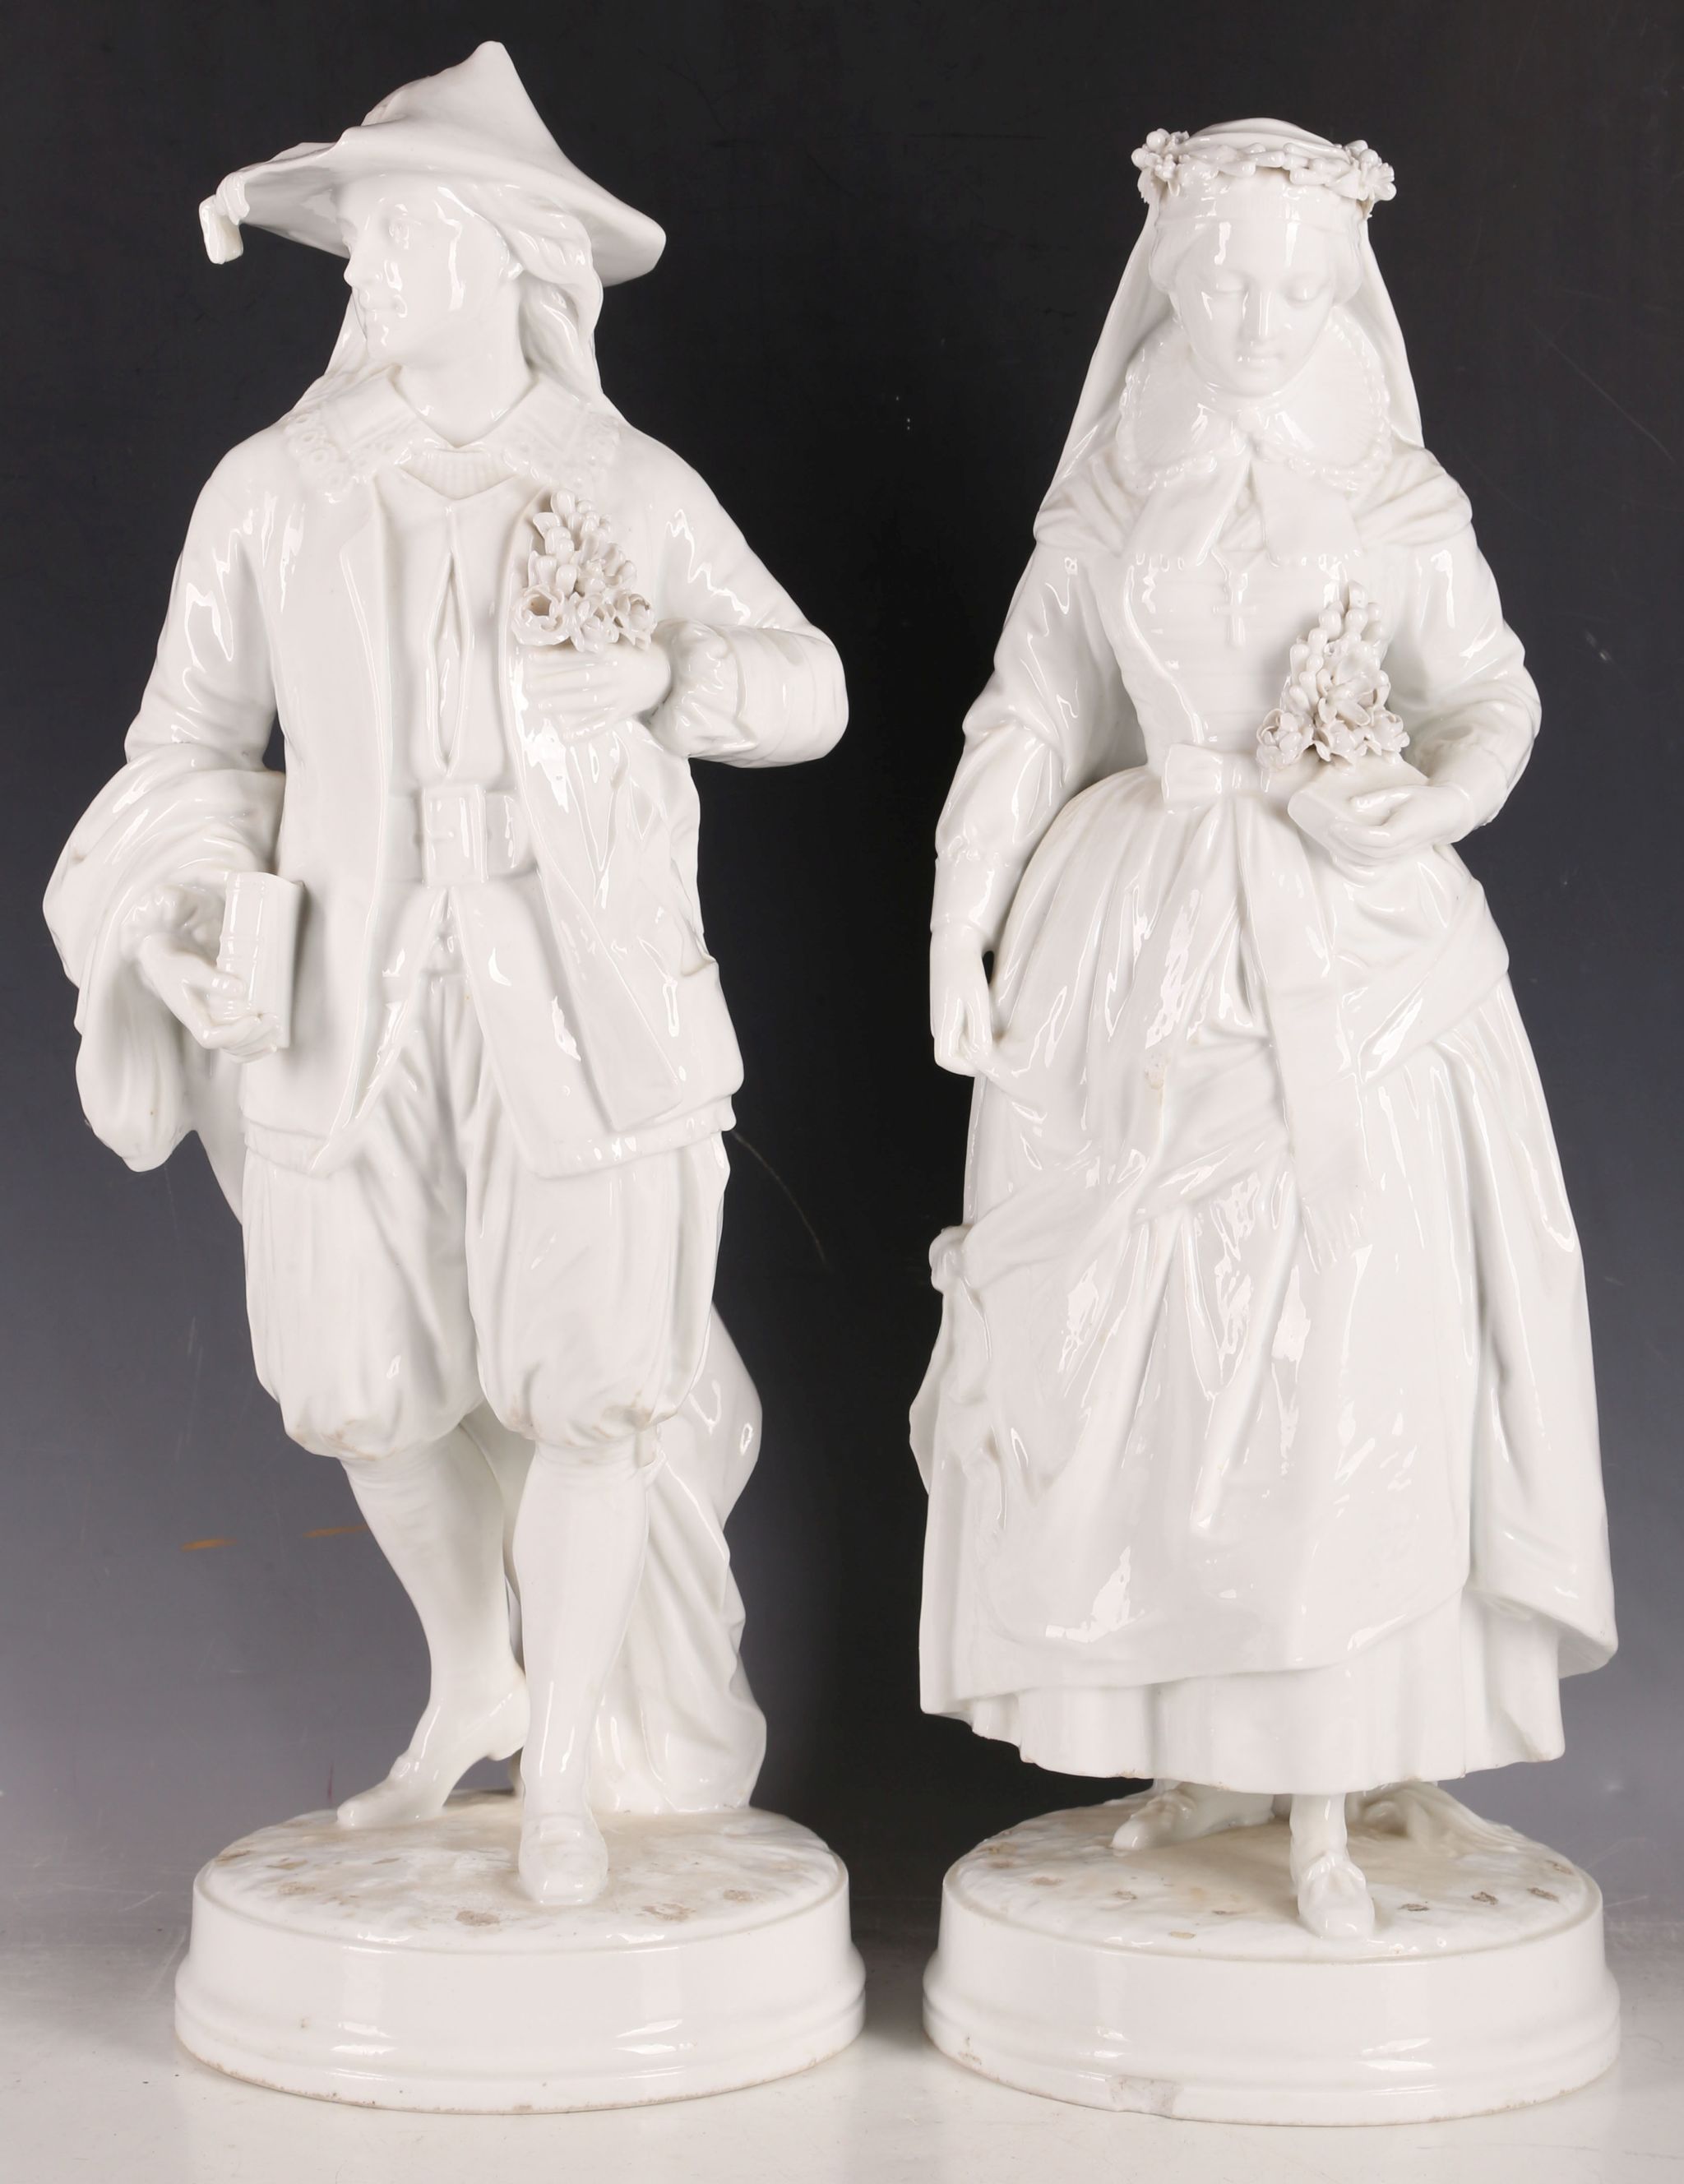 19th Century Thuringia figures; study of 18th Century young man with flowers and  young lady bearing